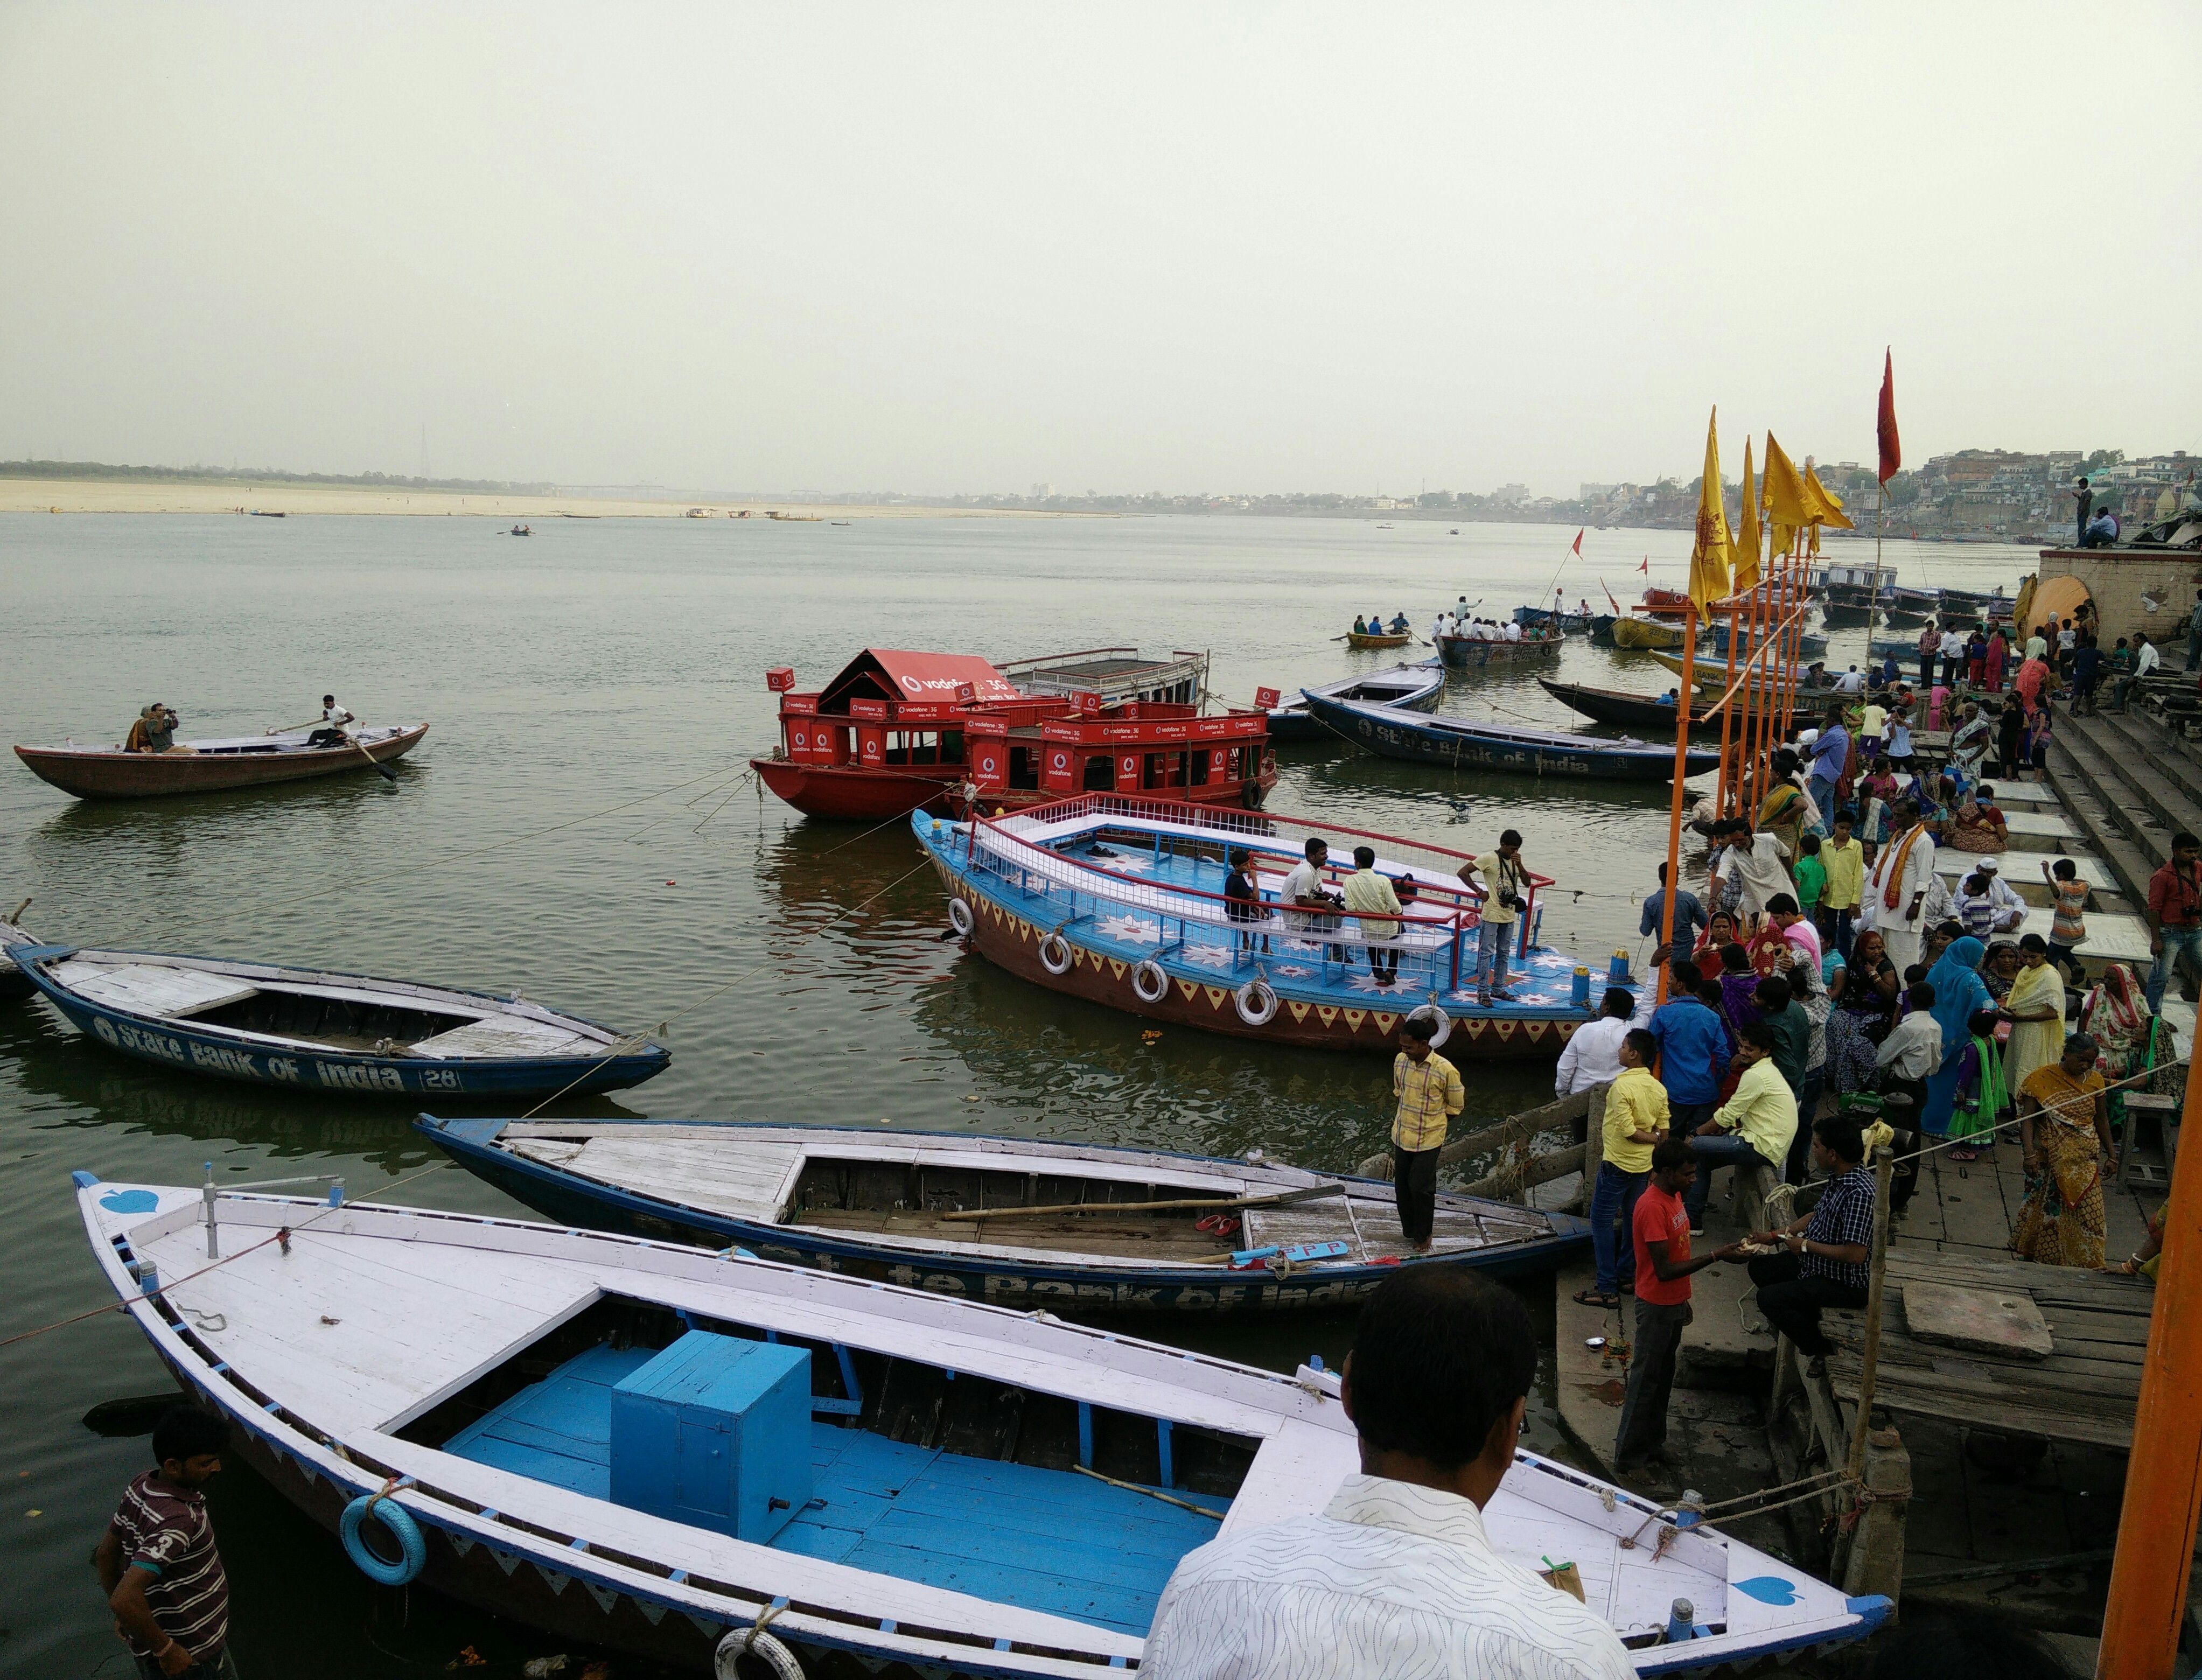 Boats with boatman on hire at the ghats.